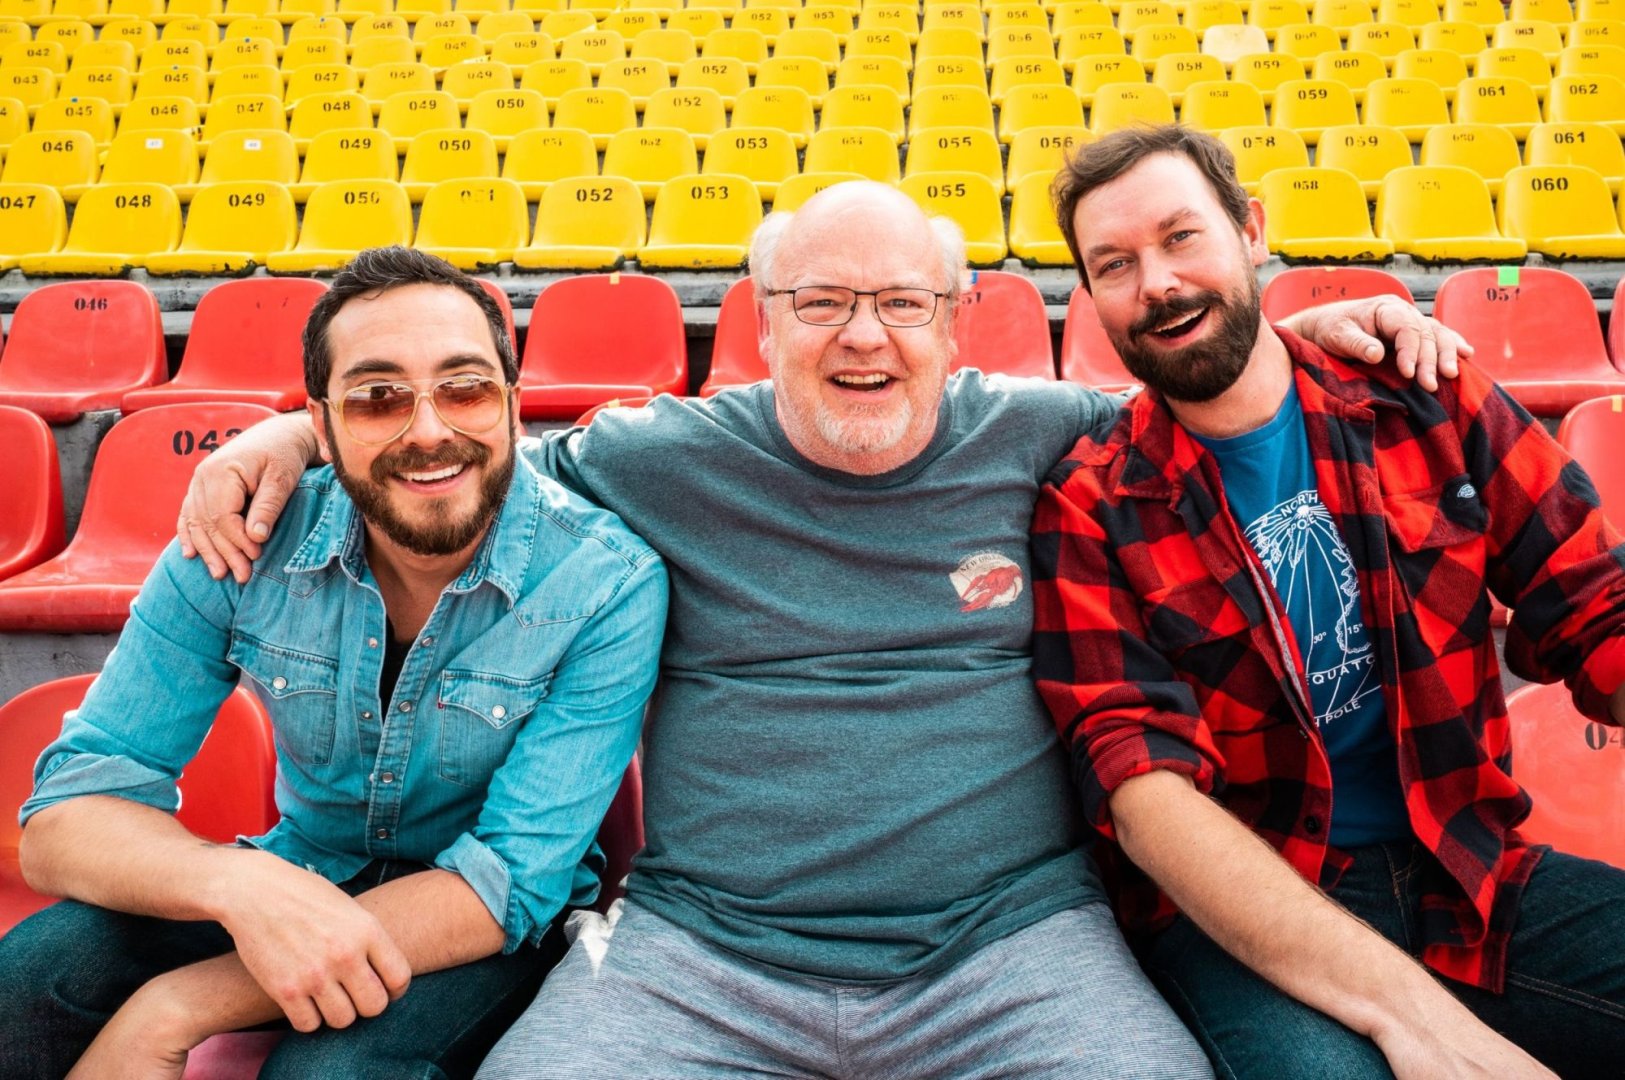 The Kyle Gass Company